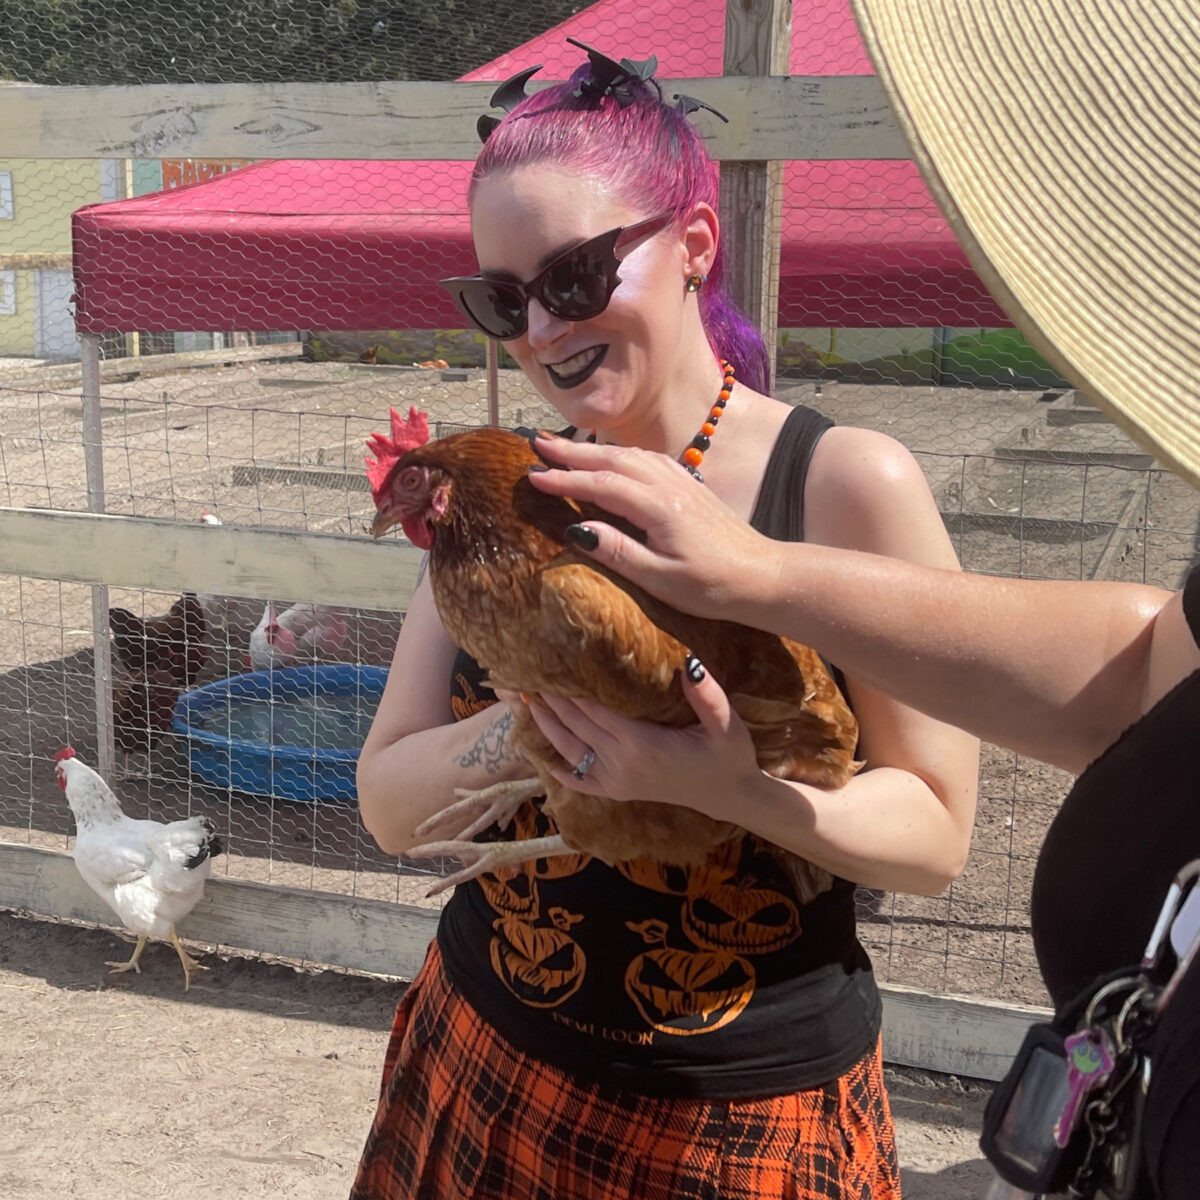 Cordelia is holding a cute friendly chicke